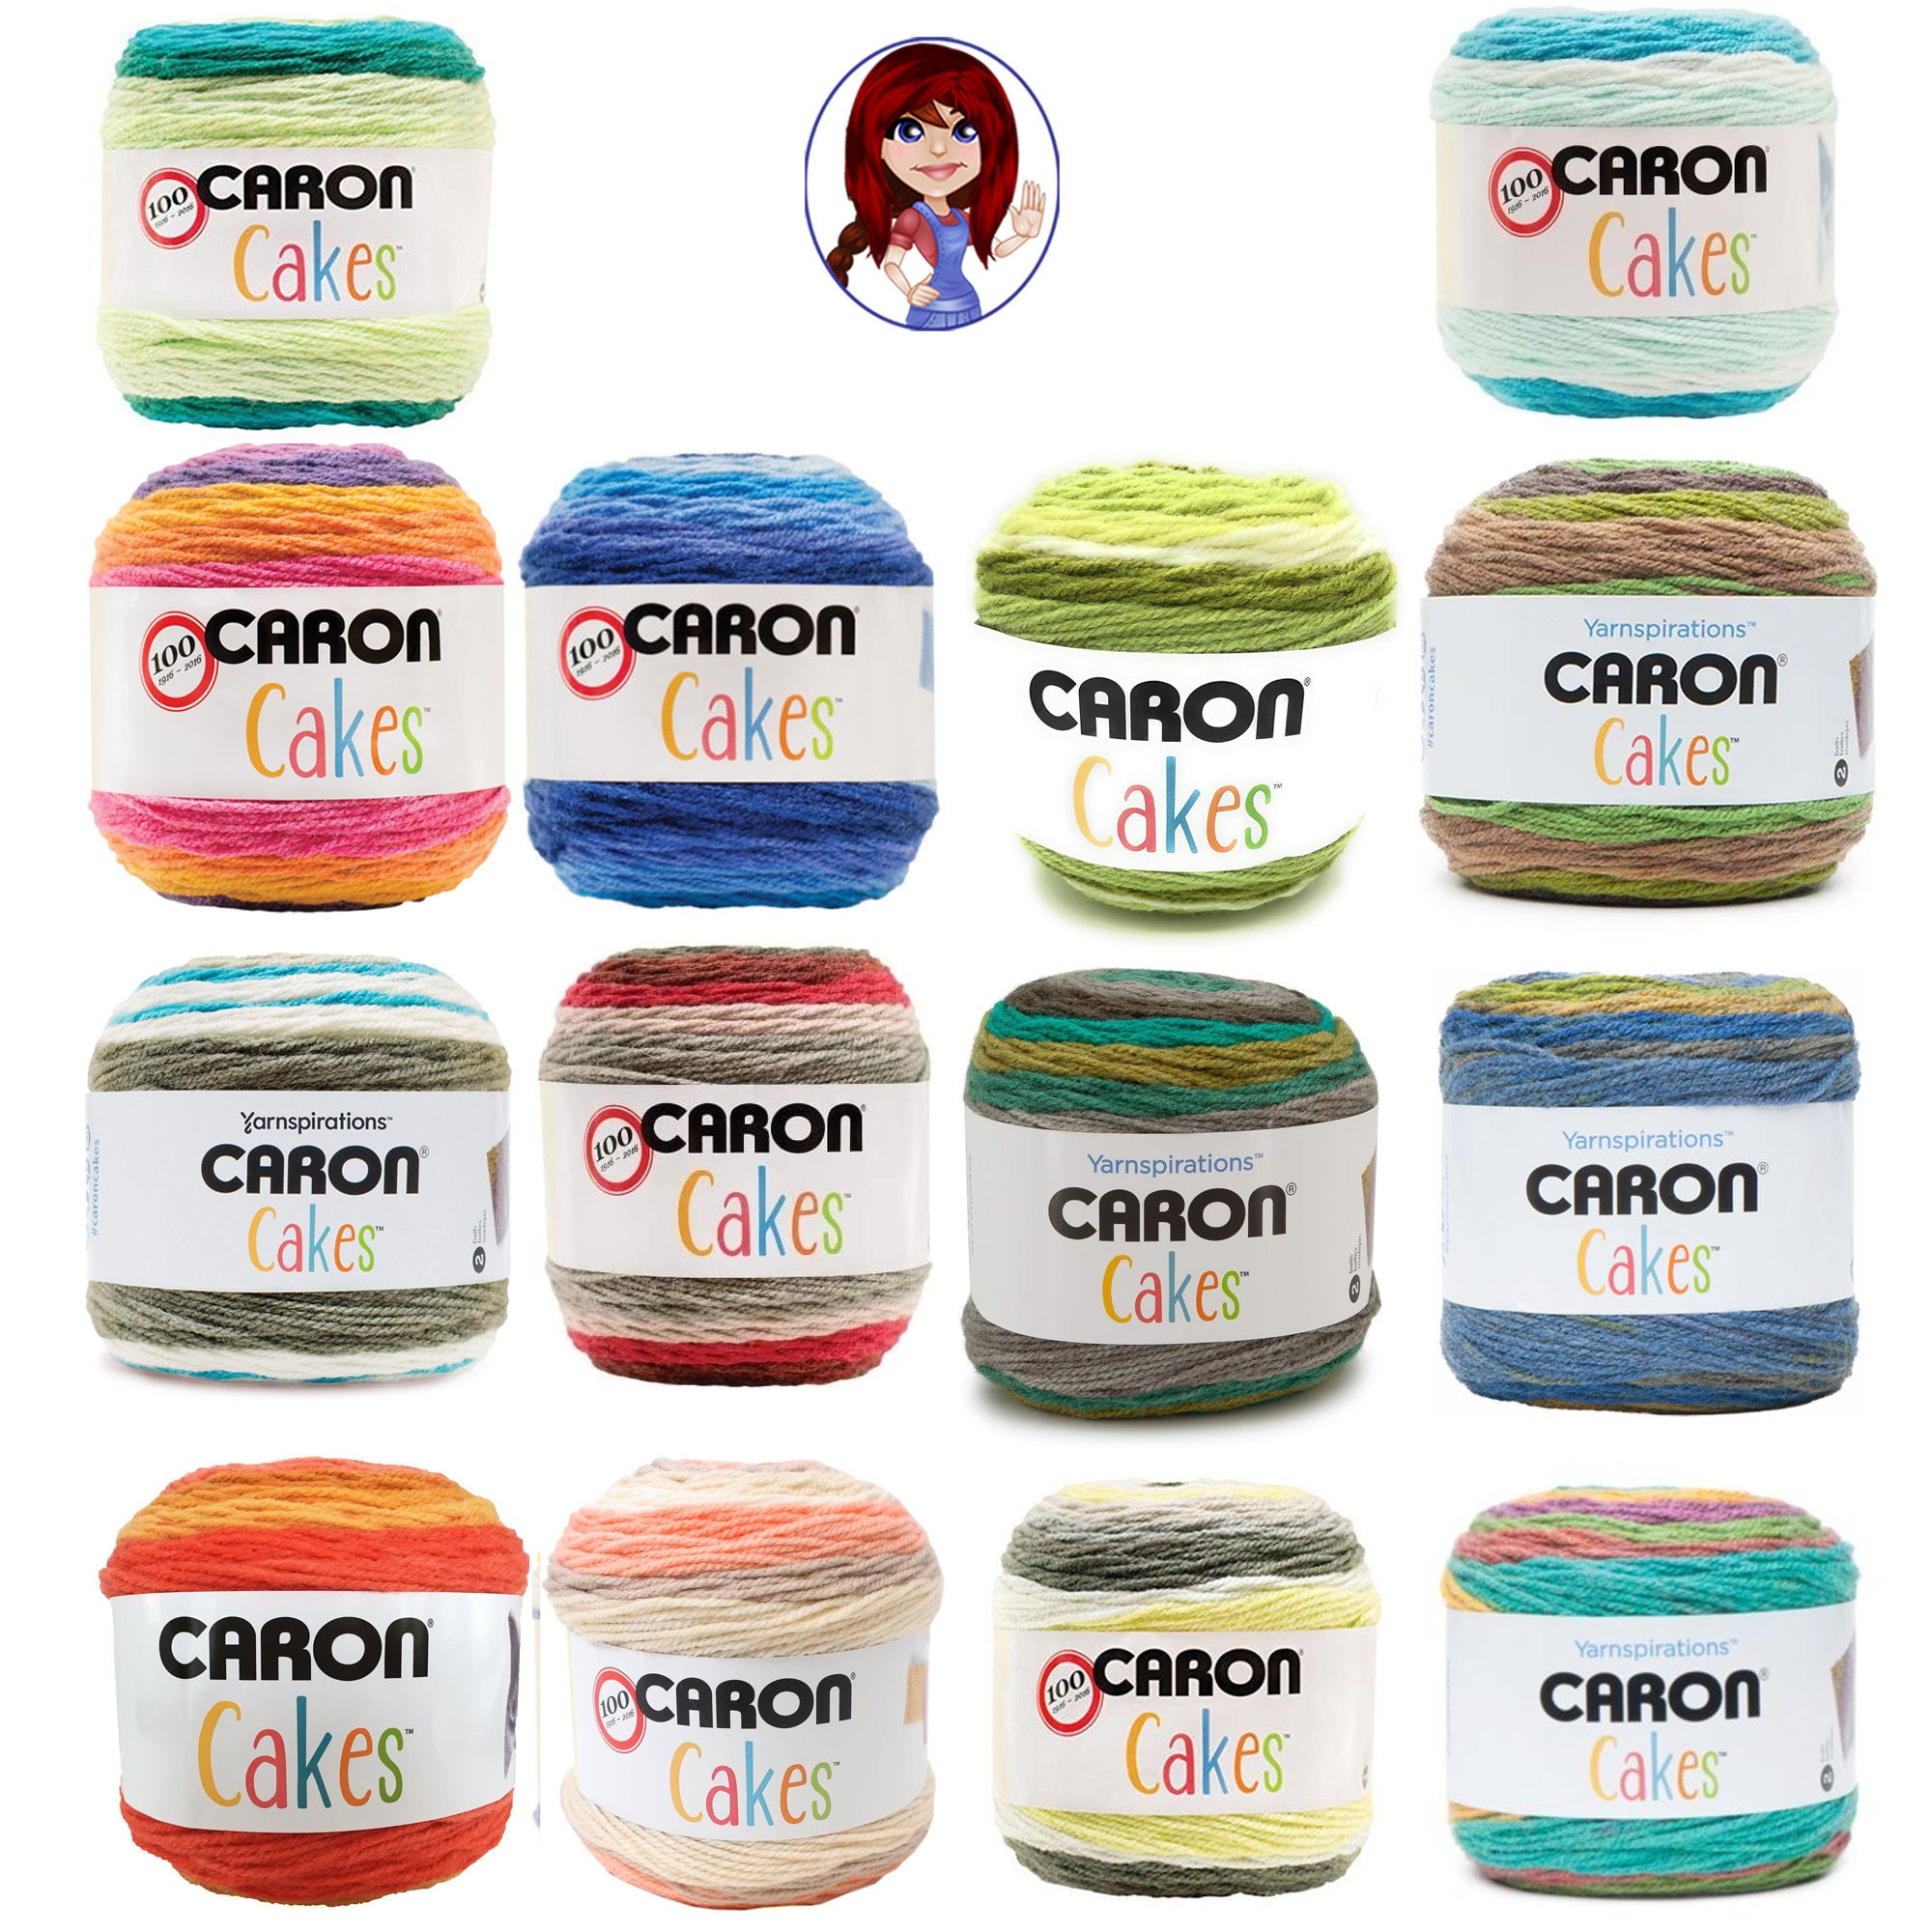 CARON CAKES Listing 1 Yarn 7.1oz Several Colors to Choose From Many  Discontinued Colors 